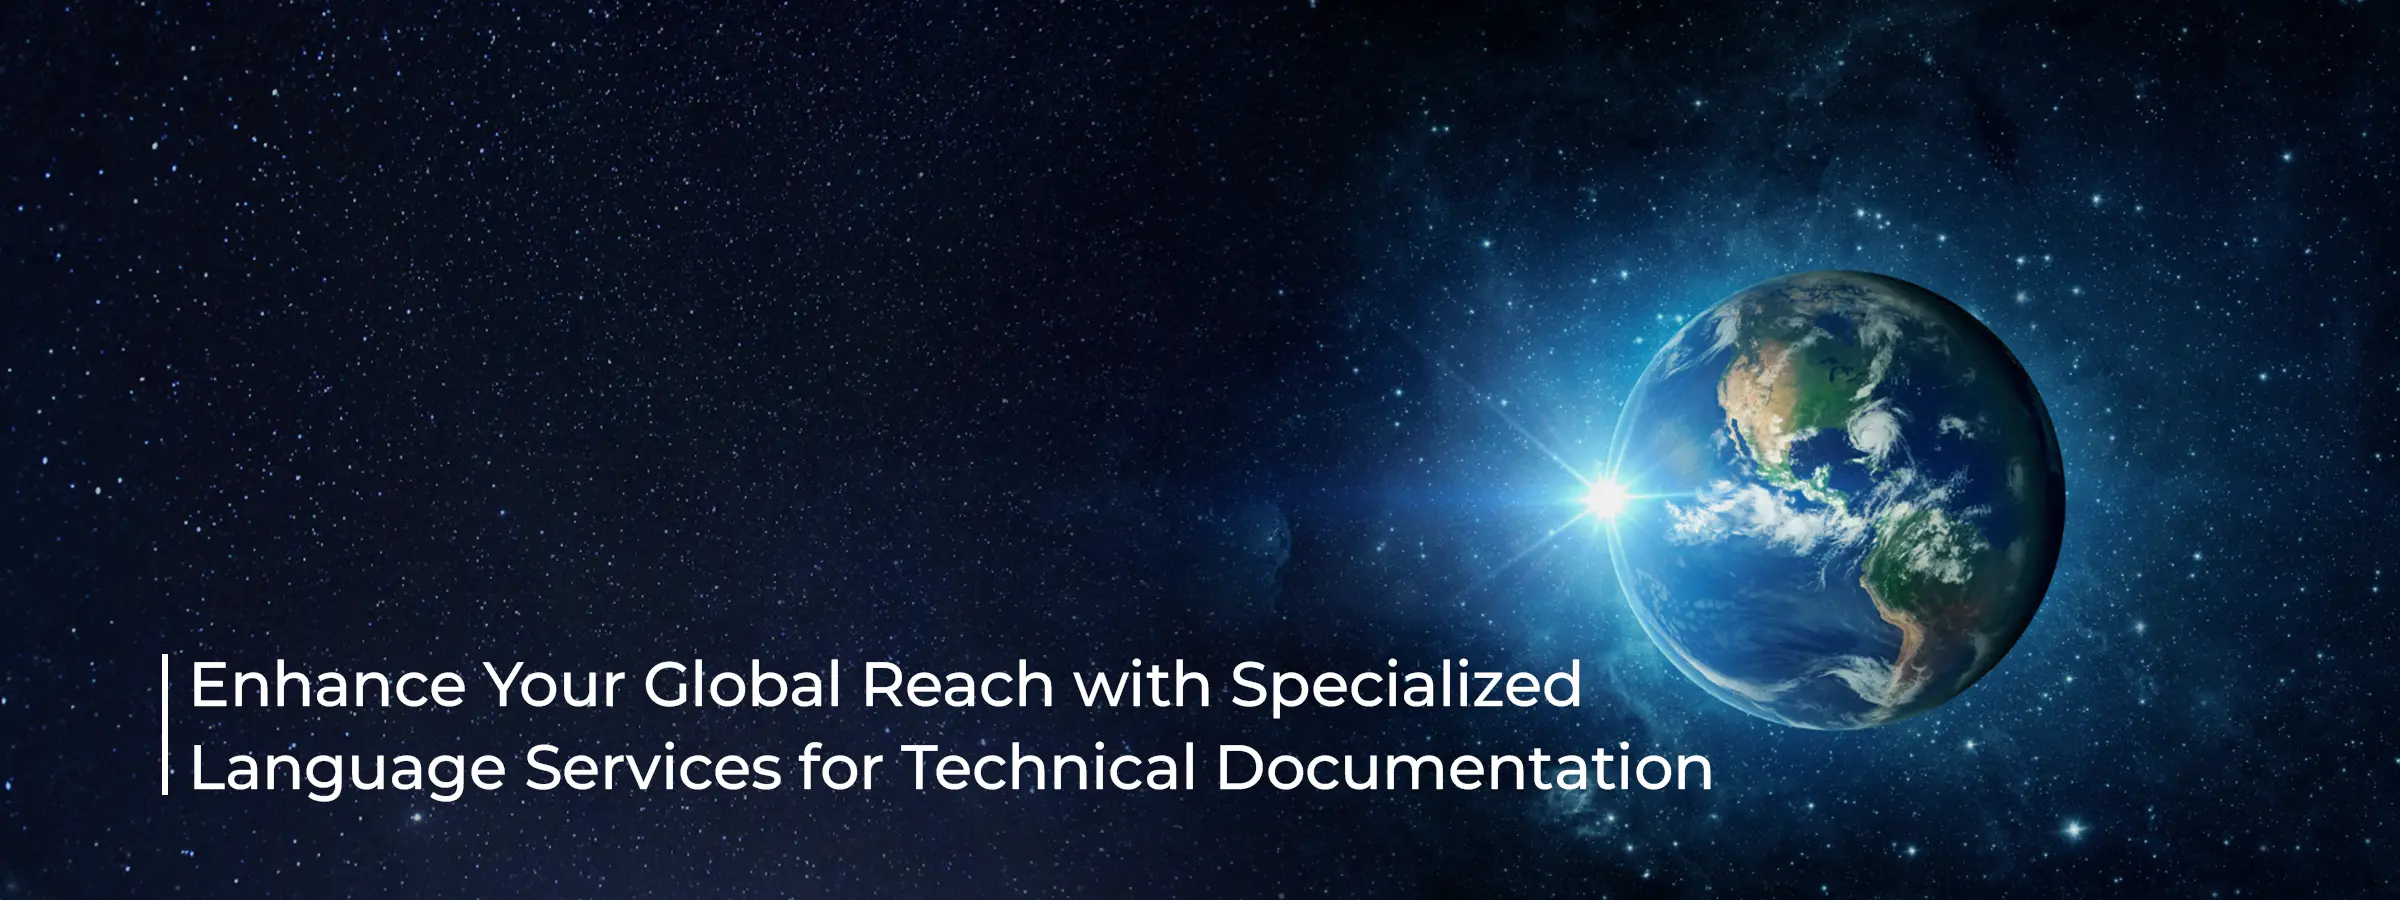 enhance-your-global-reach-with-specialized-language-services-for-technical-documenation